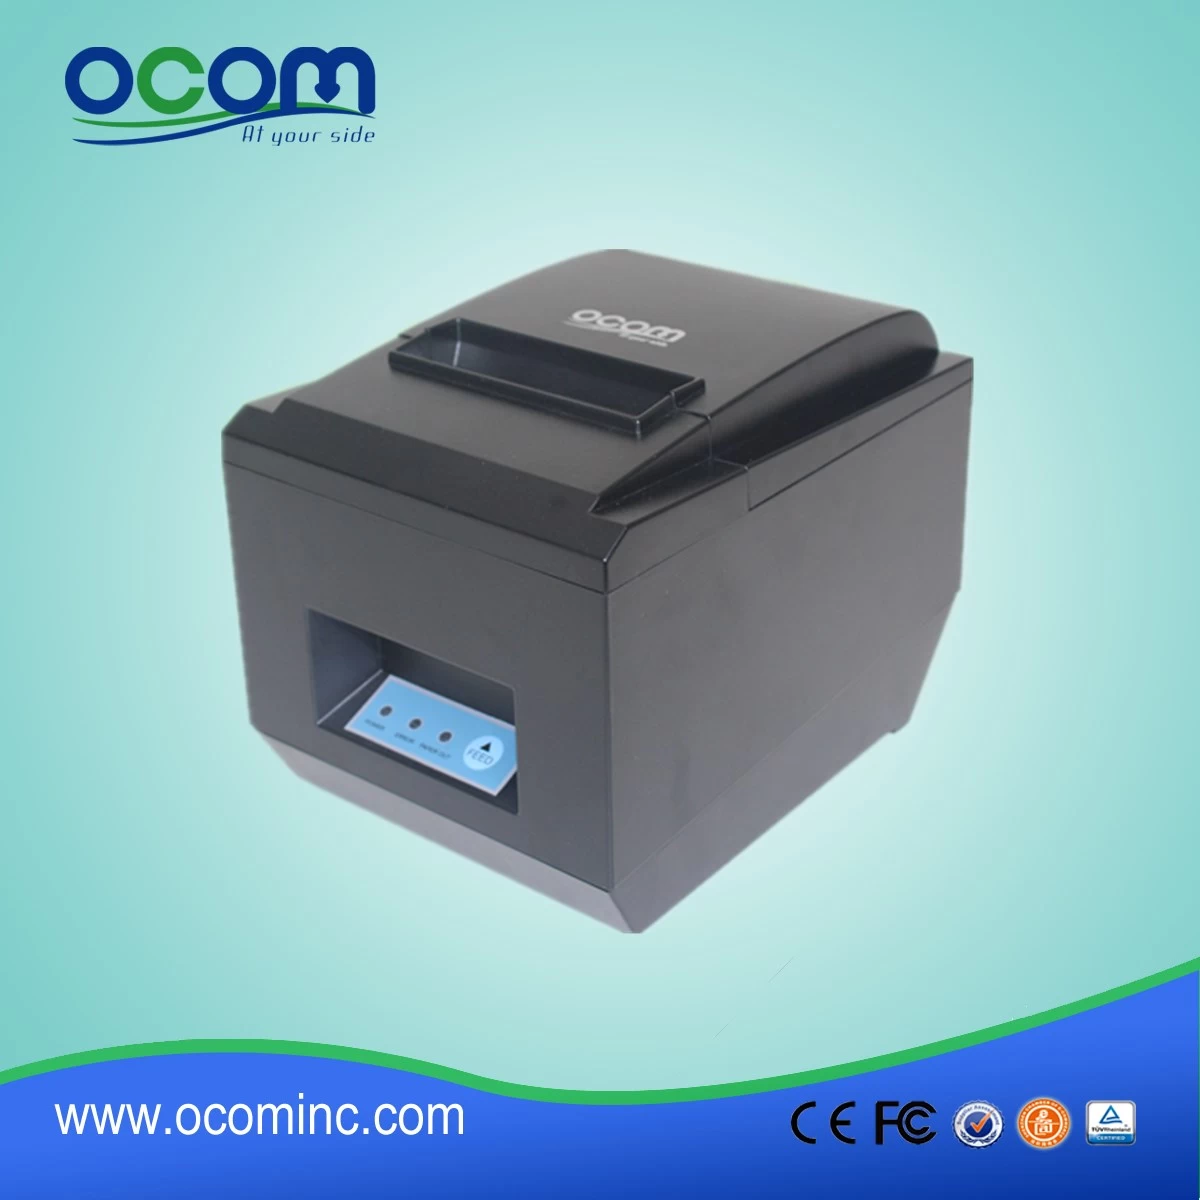 China high quality and low cost POS receipt printer-OCPP-809